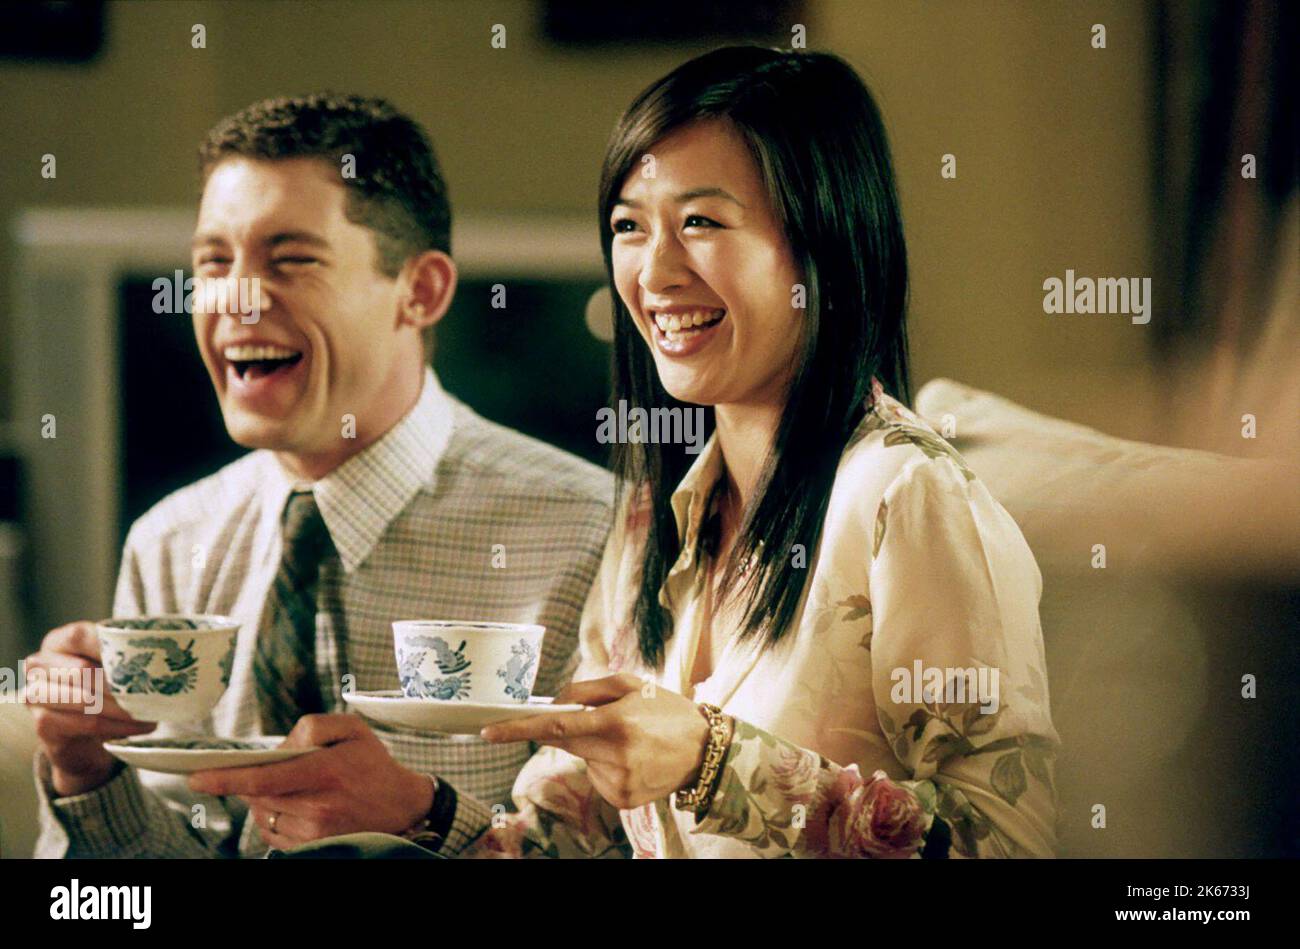 LEE EVANS, CHRISTY CHUNG, il medaglione, 2003 Foto Stock